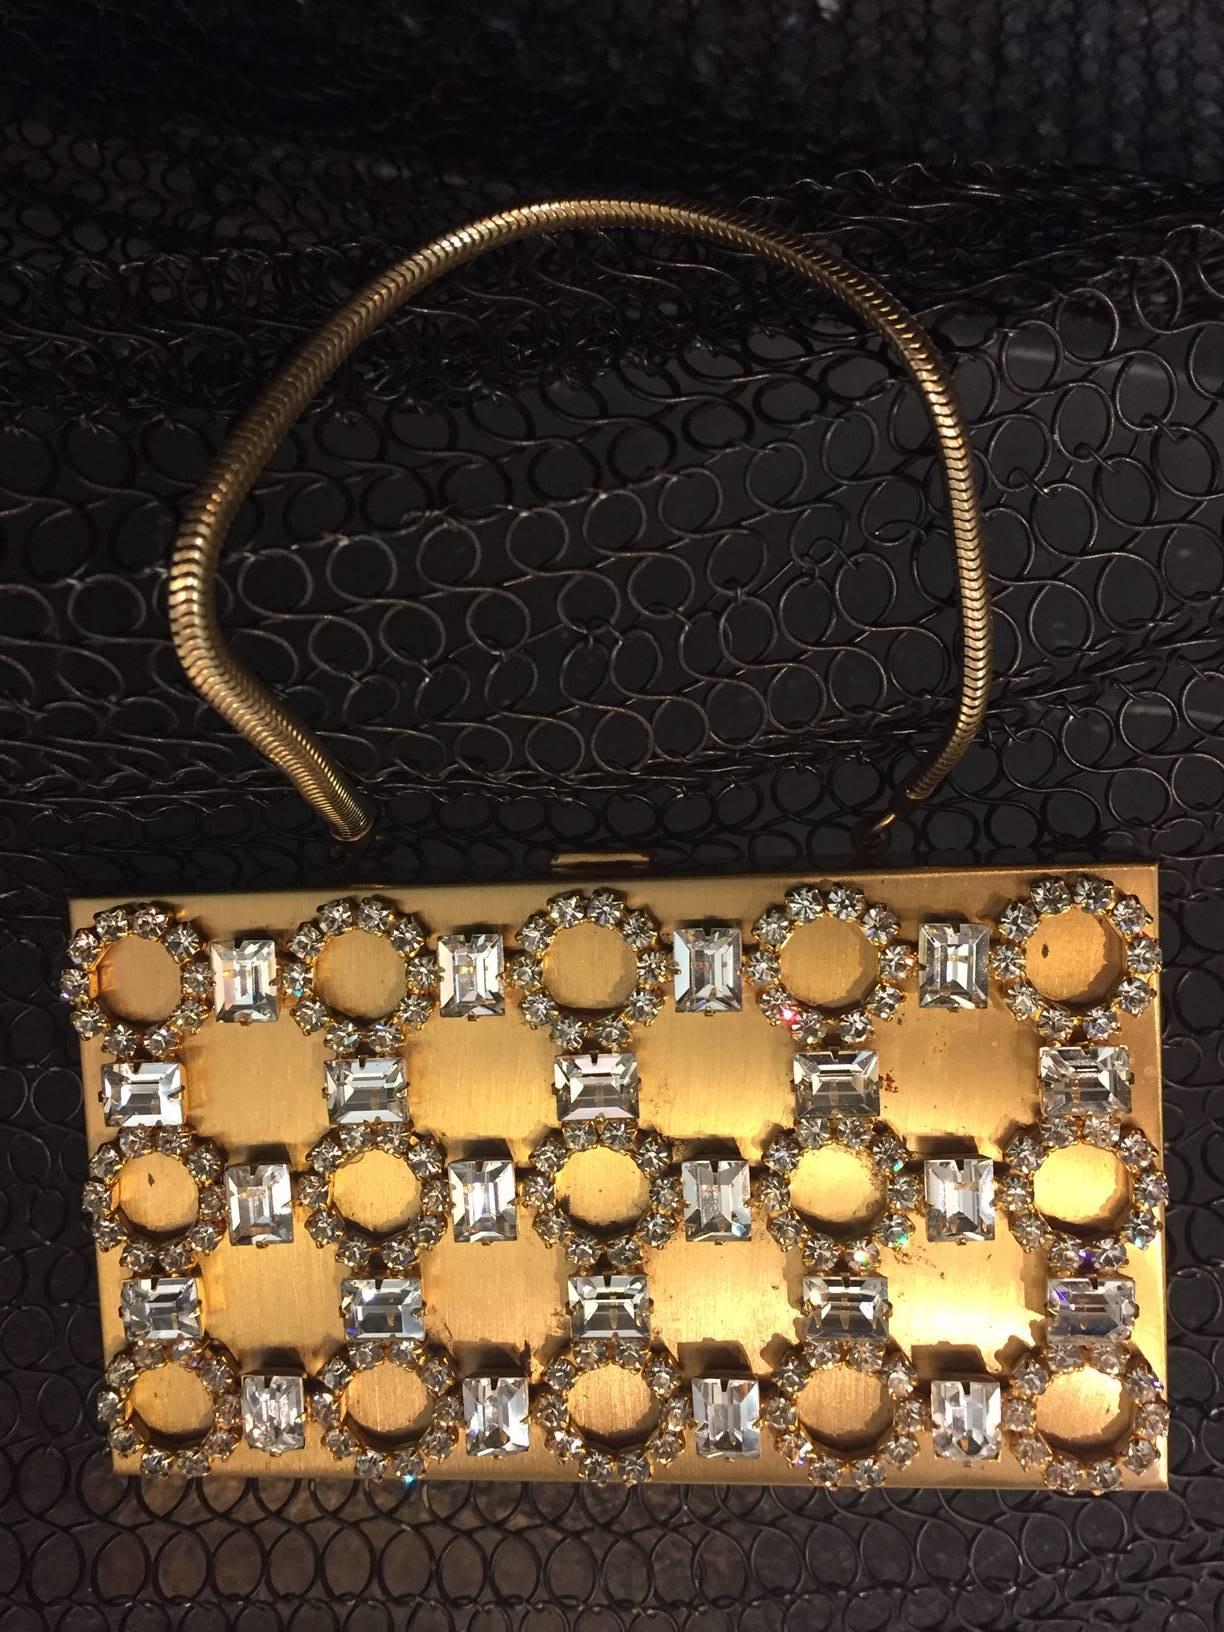 A gorgesou 1950s gold-tone rhinestone encrusted evening compact clutch with chain handle.  Small thin compartment for credit card and key.  Empty lipstick compartment. and 